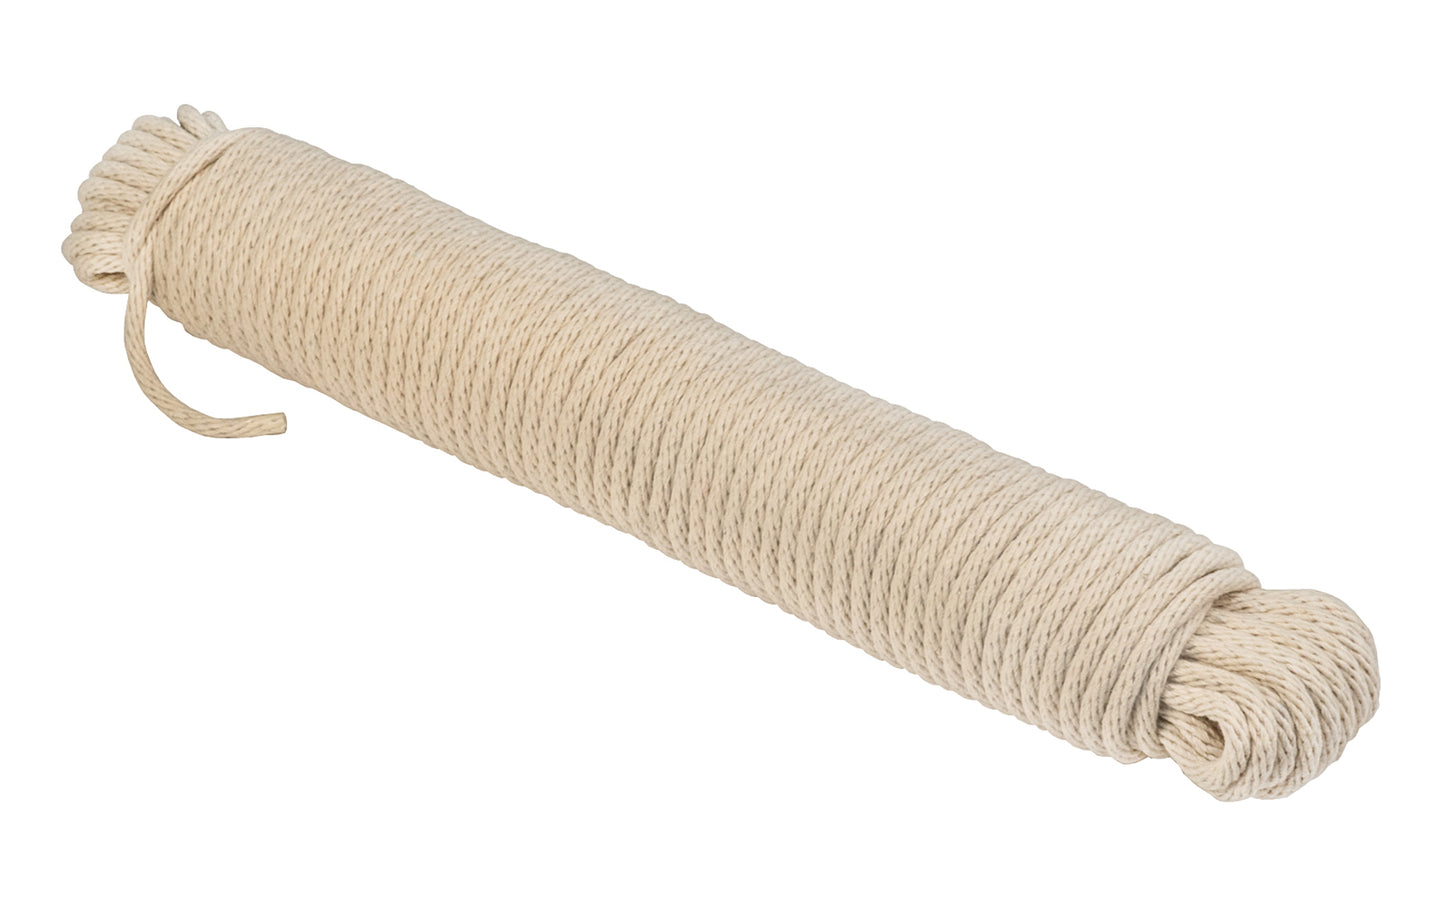 Natural Cotton Braided Sash Cord ~ #7 Size - 7/32" x 100'. Maximum wear & high breaking strength (30 lb. working load limit). Solid braided cotton sash cord for sash windows #7 size cord ~ Natural cotton fiber ~ Low stretch ~ 7/32" thick diameter x 100' long. Great for other purposes around the shop.